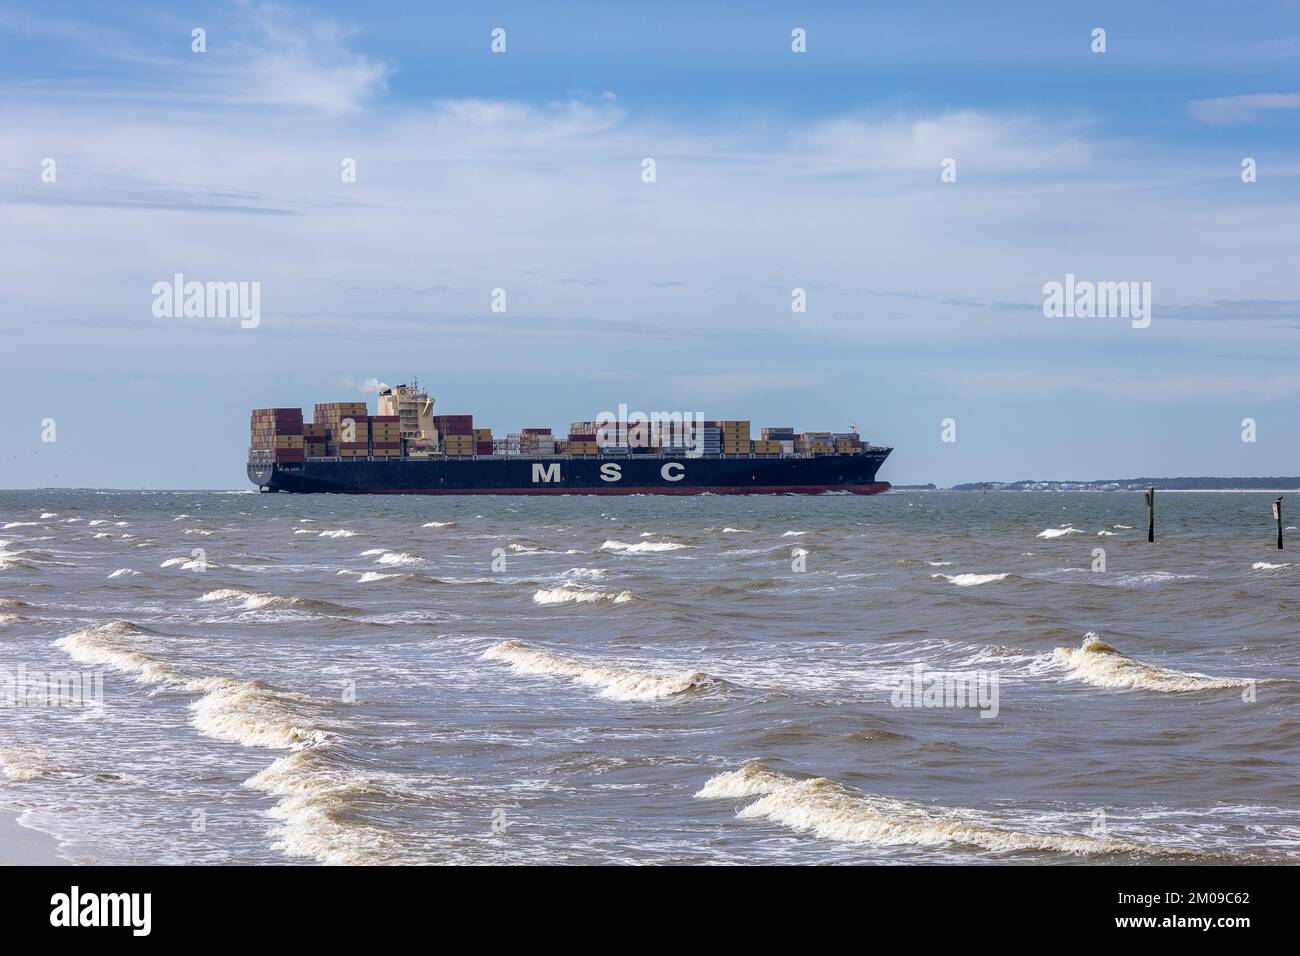 MSC Container Ship At Mobile Point Alabama Enroute To The Port Of Mobile United States Of America Stock Photo